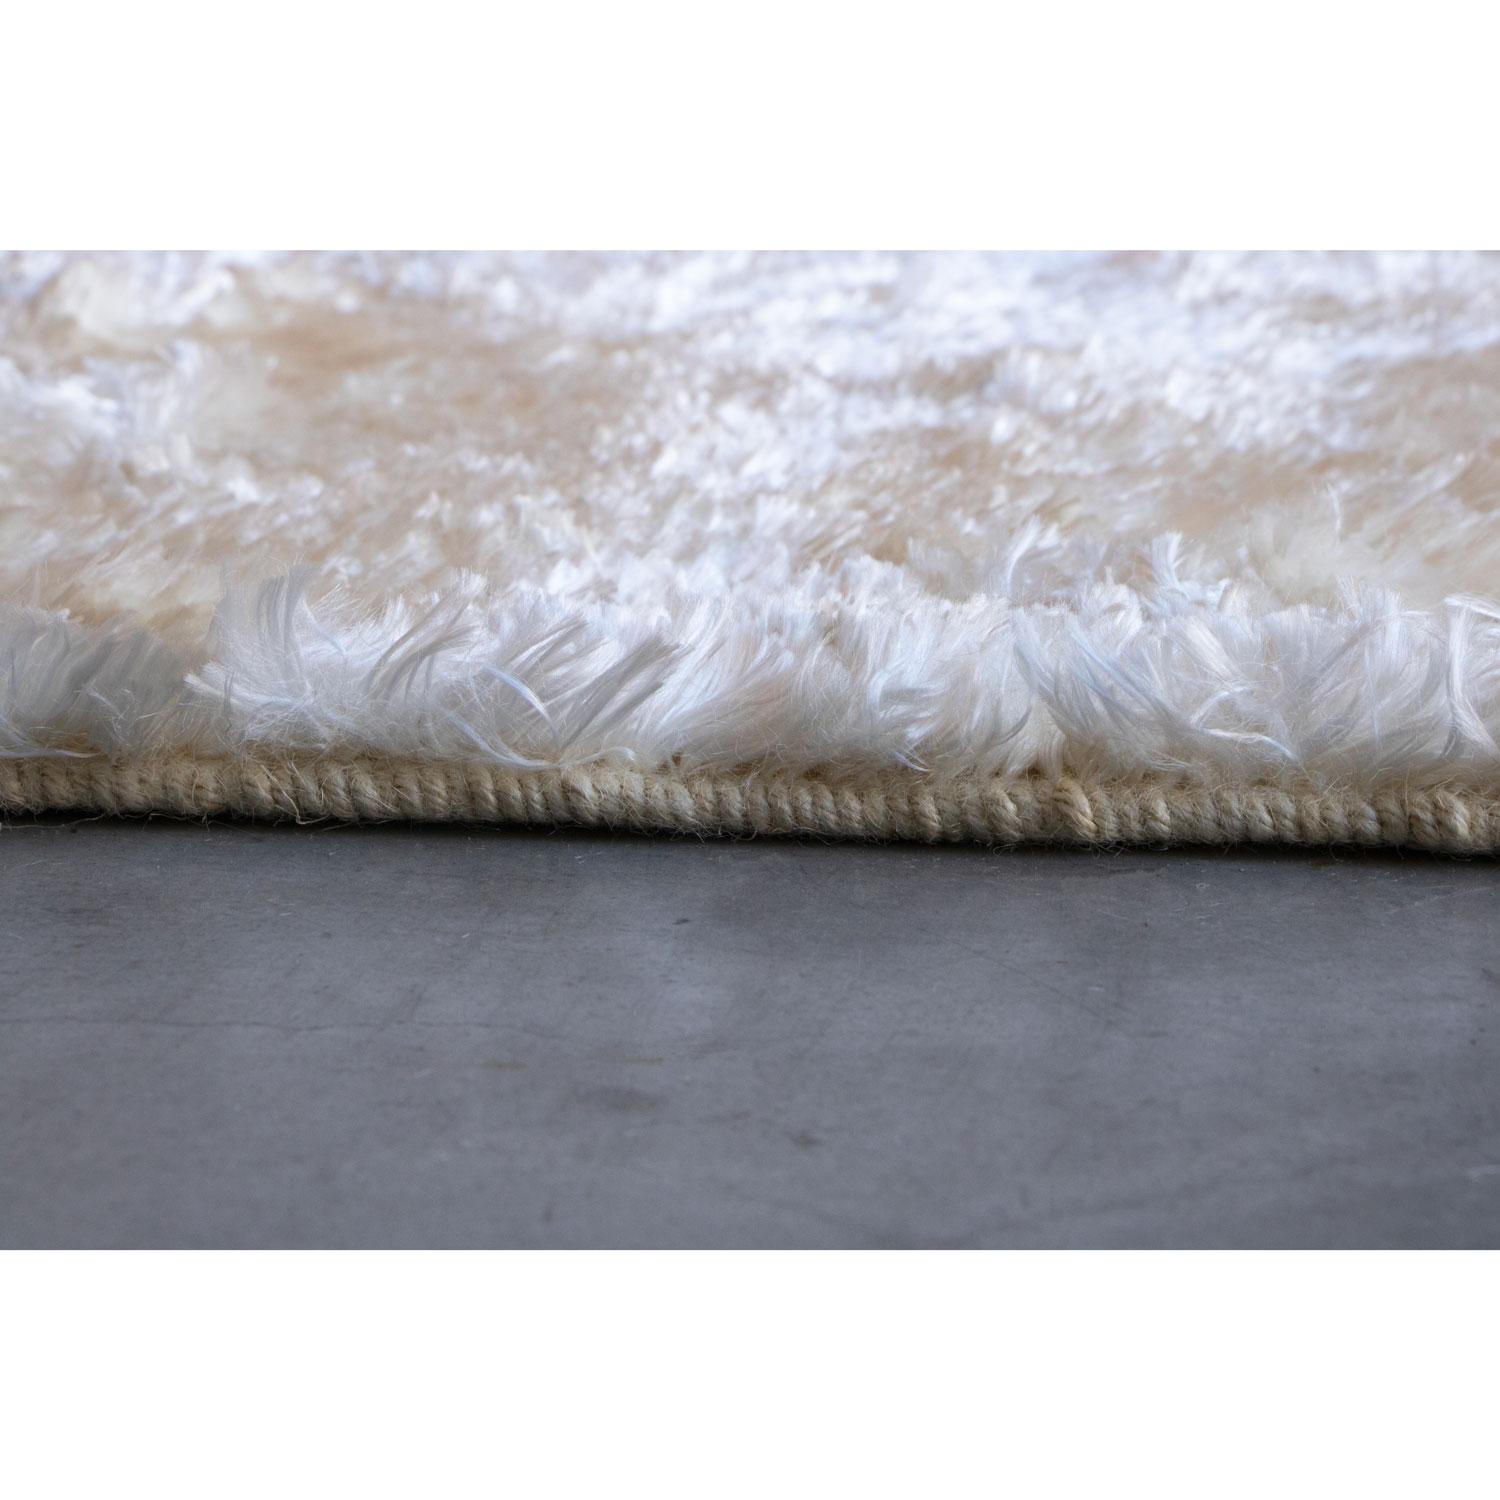 Modern Contemporary Warm Whitre Soft Shiny Silky Rug by Deanna Comellini 300x400 cm For Sale